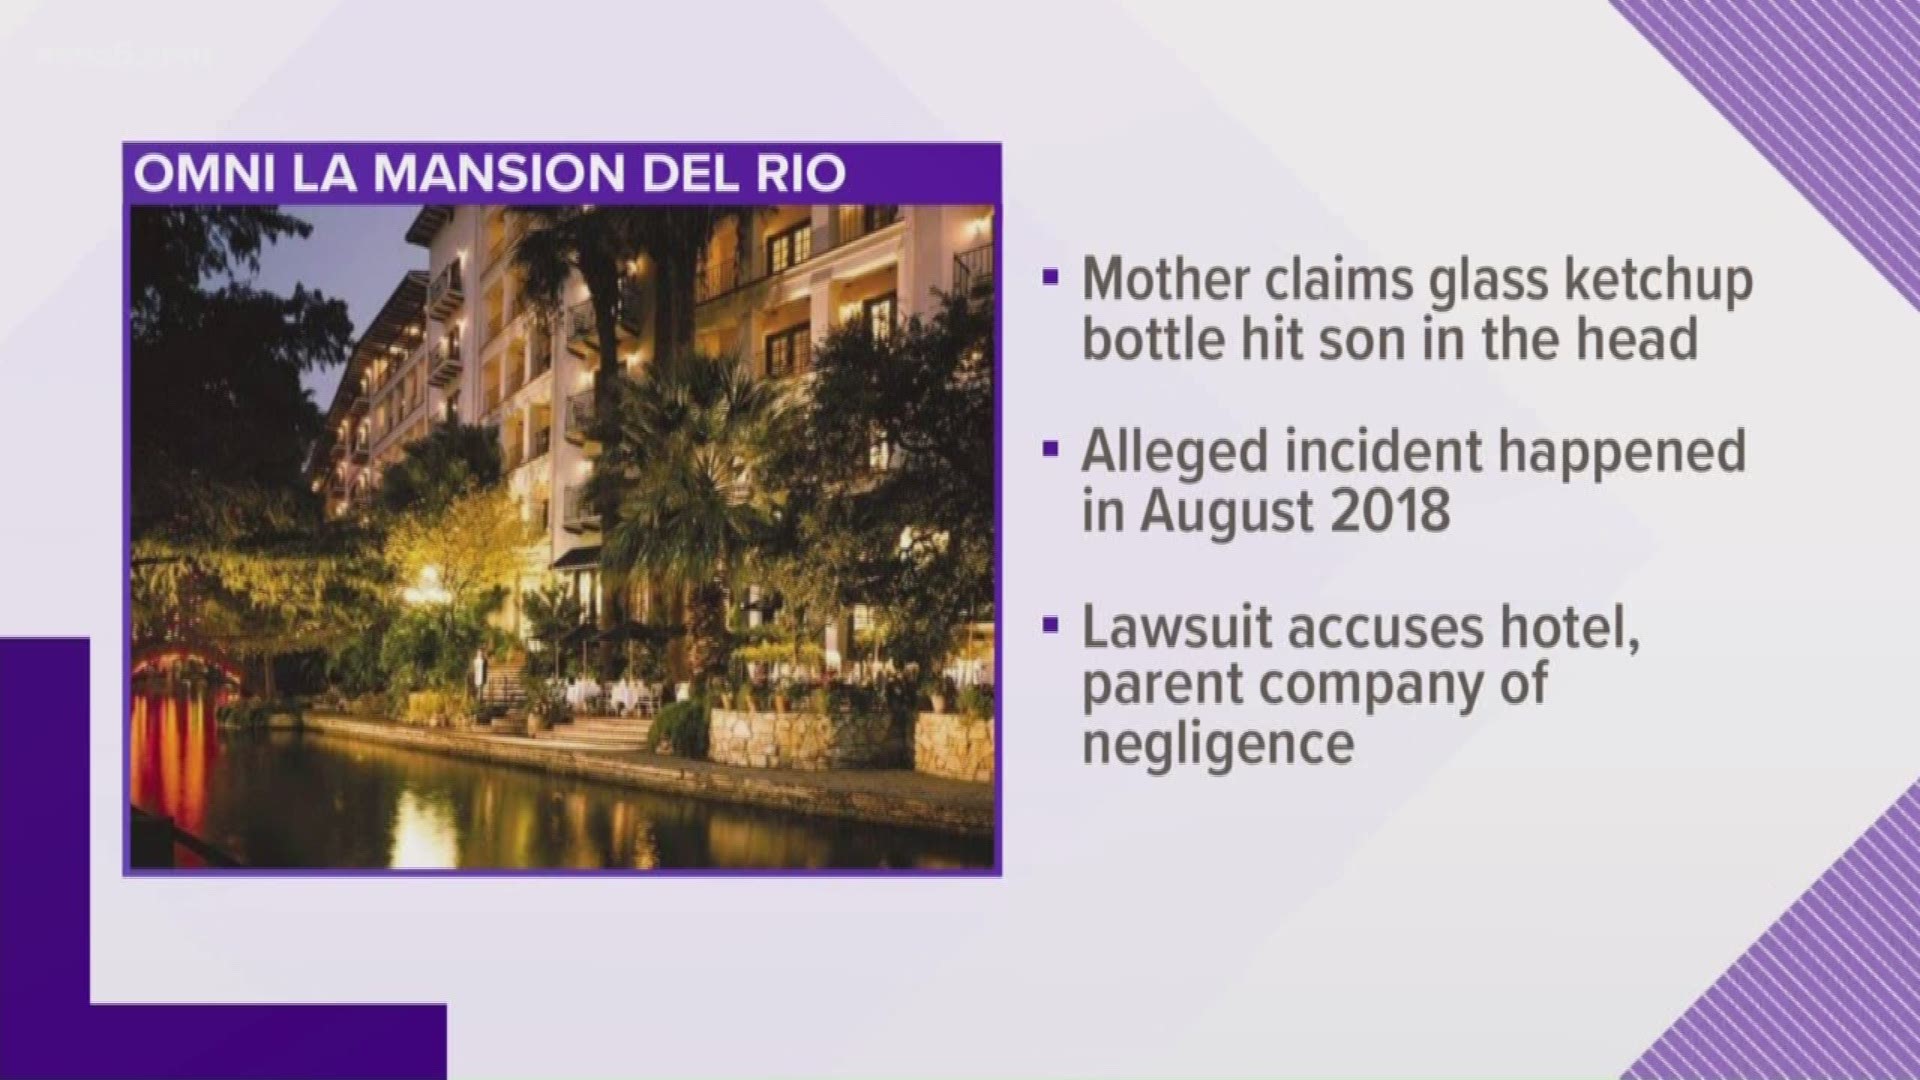 A  hotel is being sued for $1 million over a bottle of ketchup. A mother claims the glass bottle fell from a balcony and hit her 2-year-old son in the head.